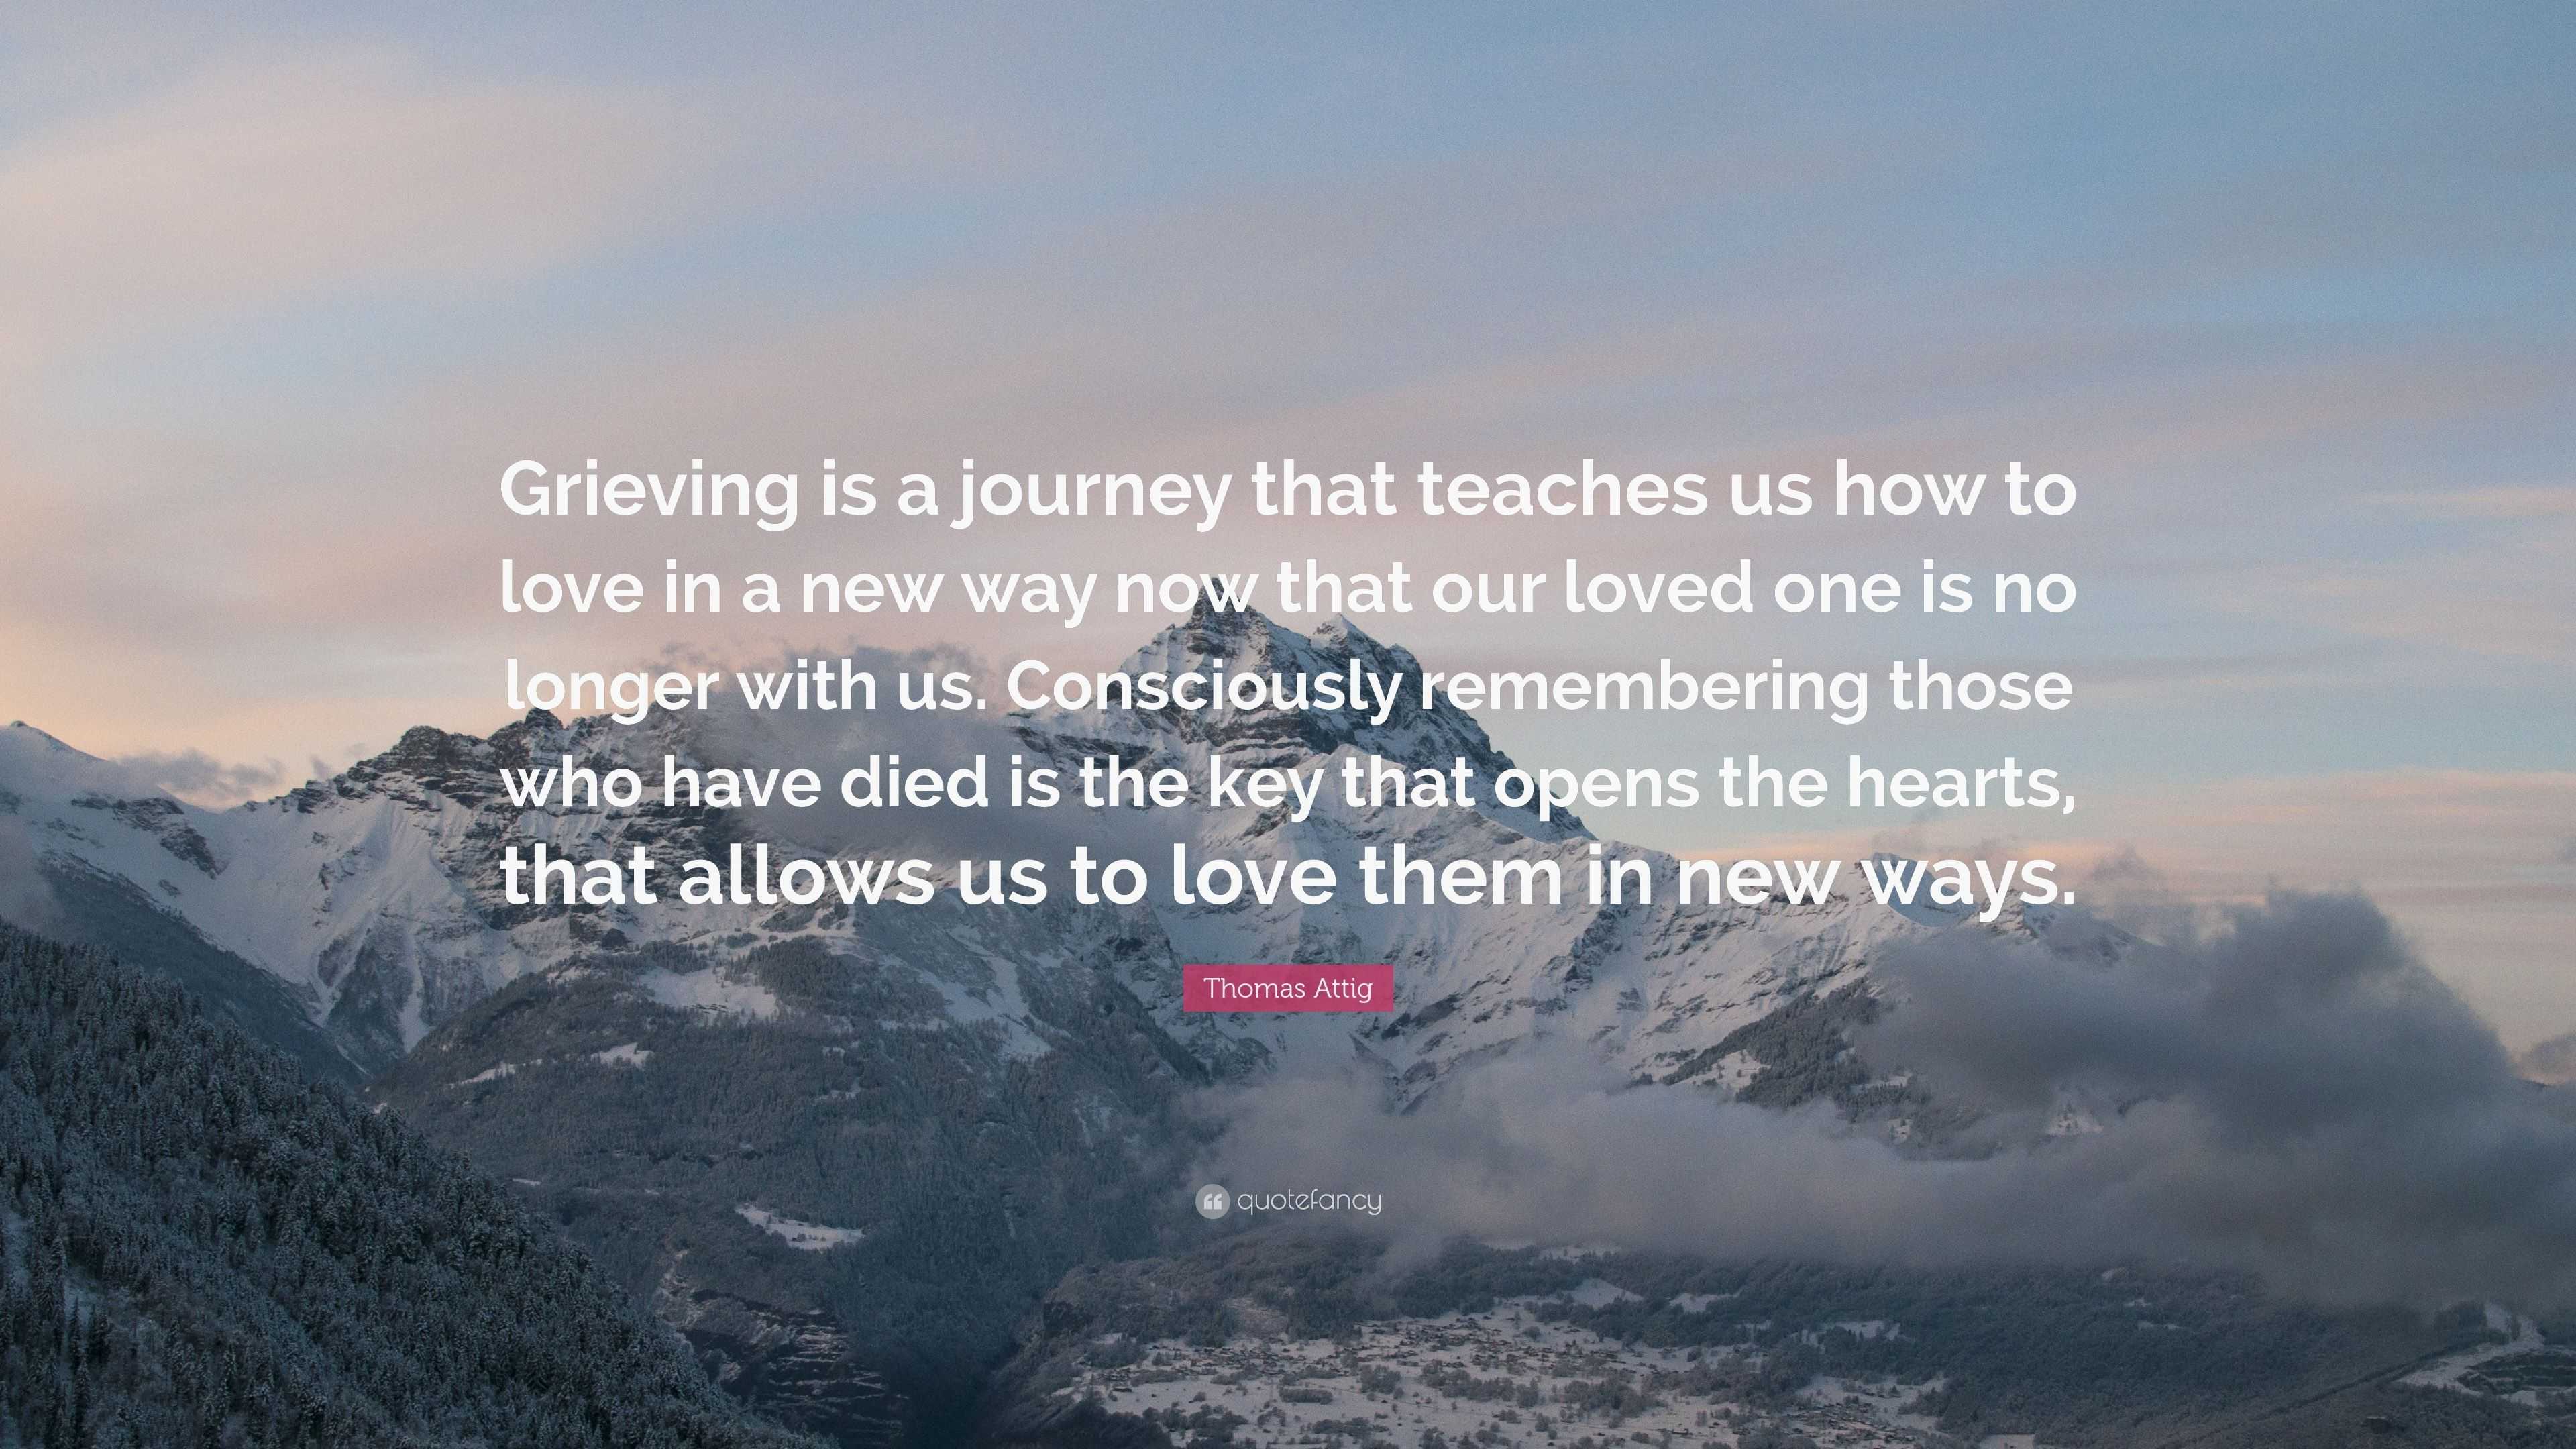 Thomas Attig Quote “Grieving is a journey that teaches us how to love in